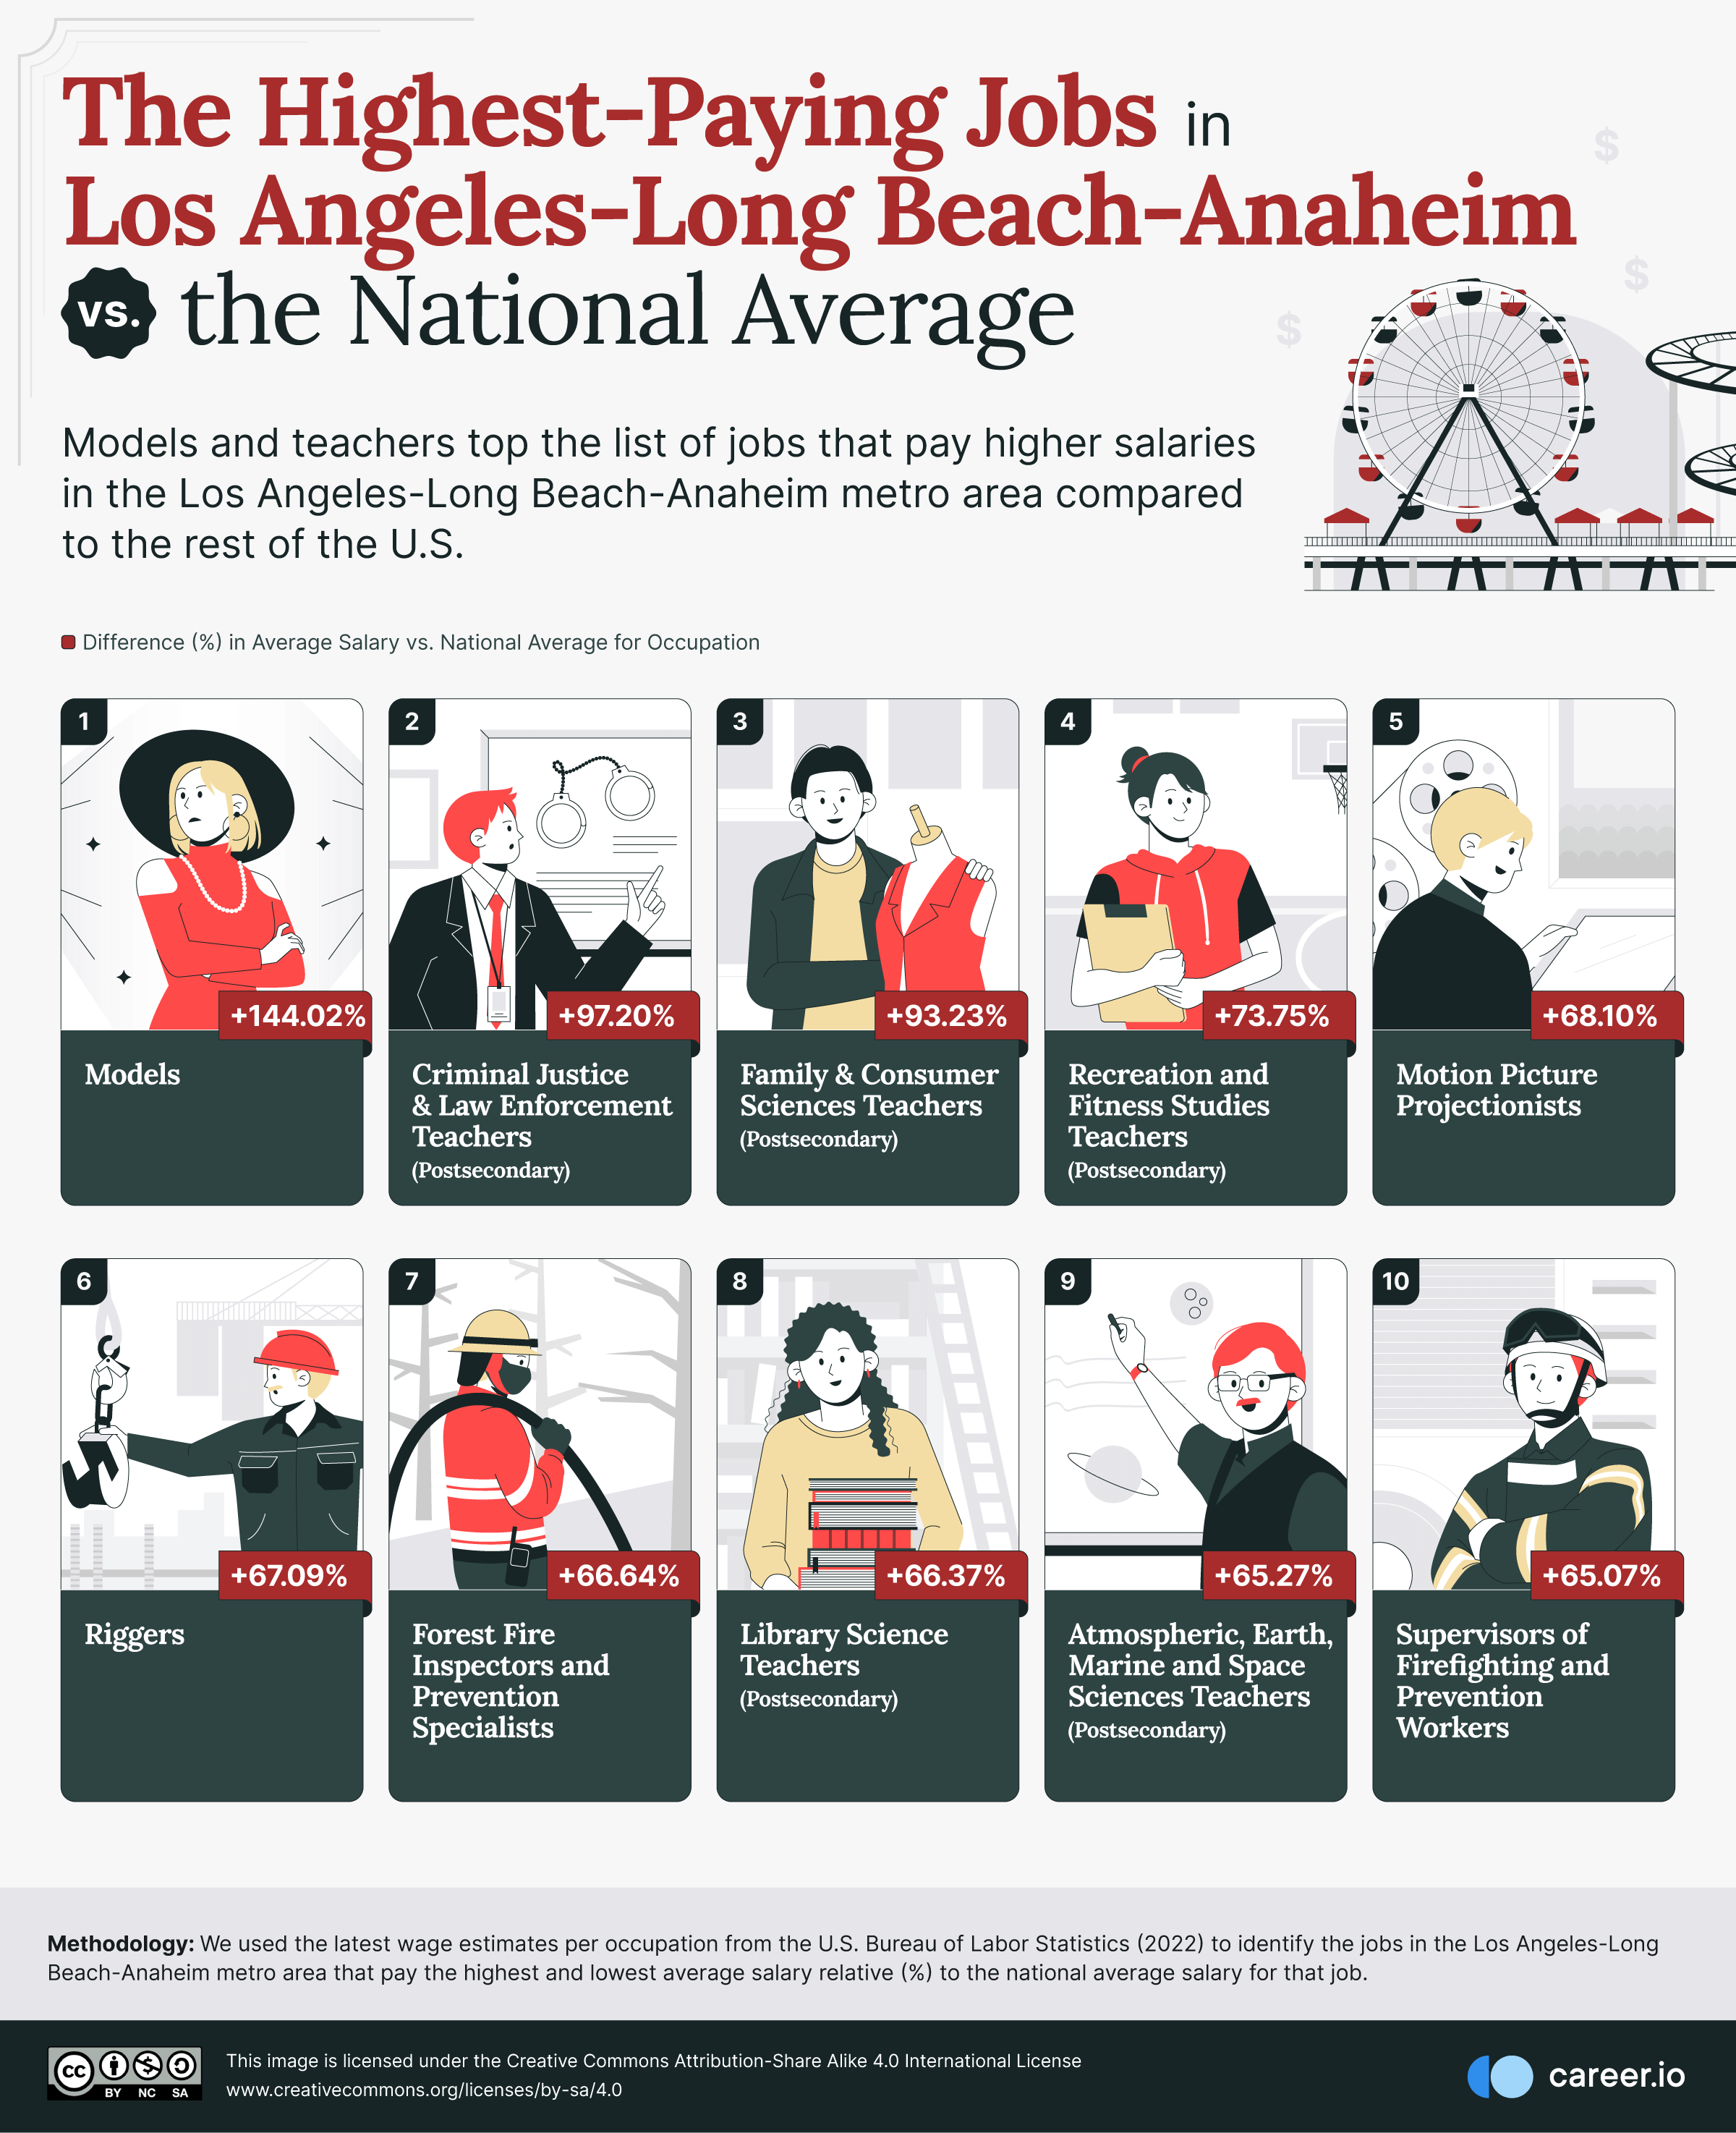 05_Highest-Paying-Job-in-LA-LB-ANA-vs-the-National-Average